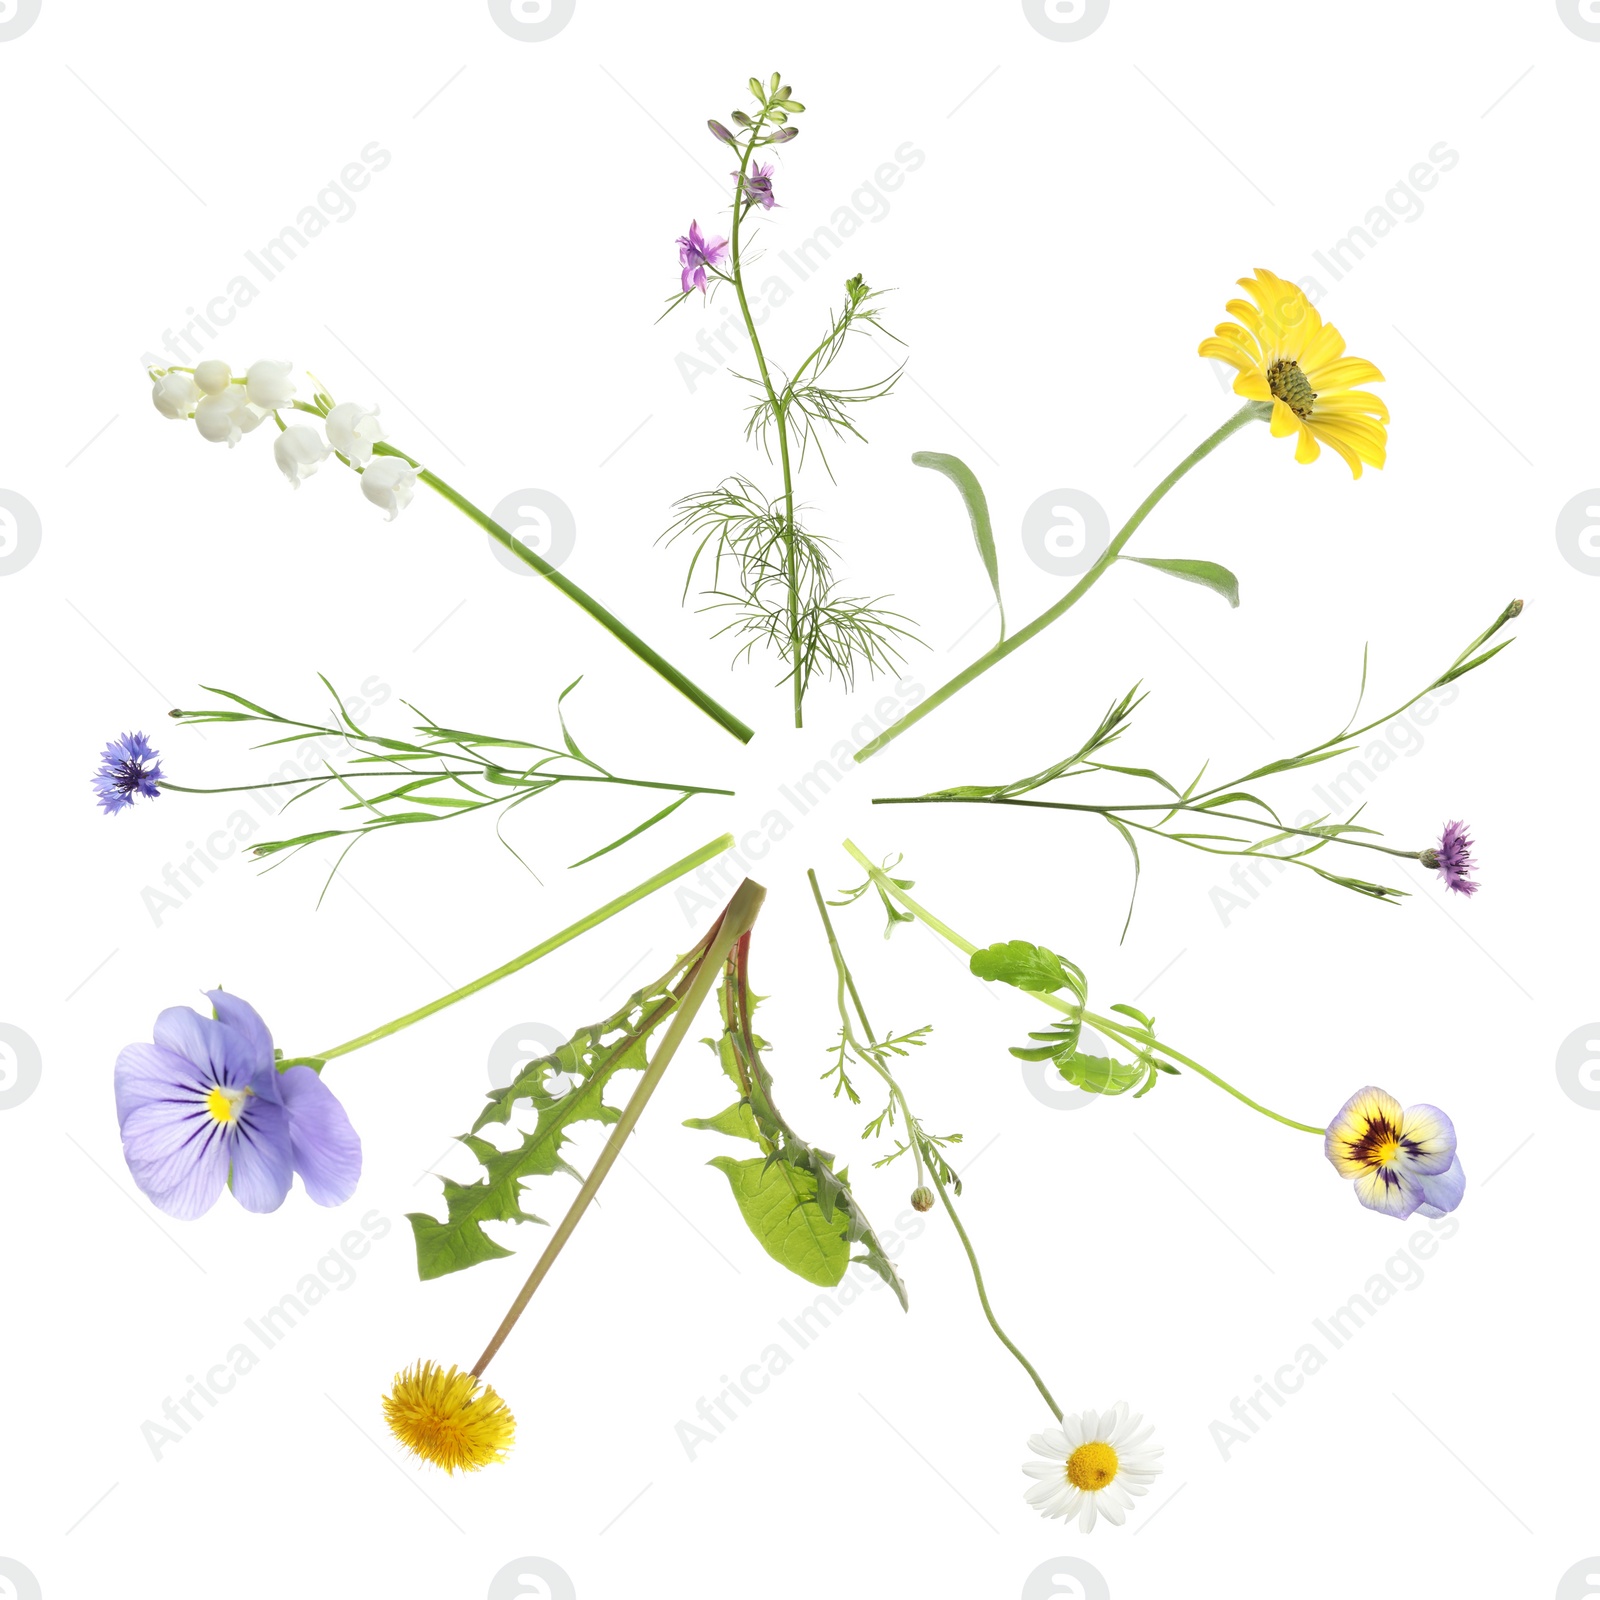 Image of Collection of different beautiful wild flowers on white background, top view